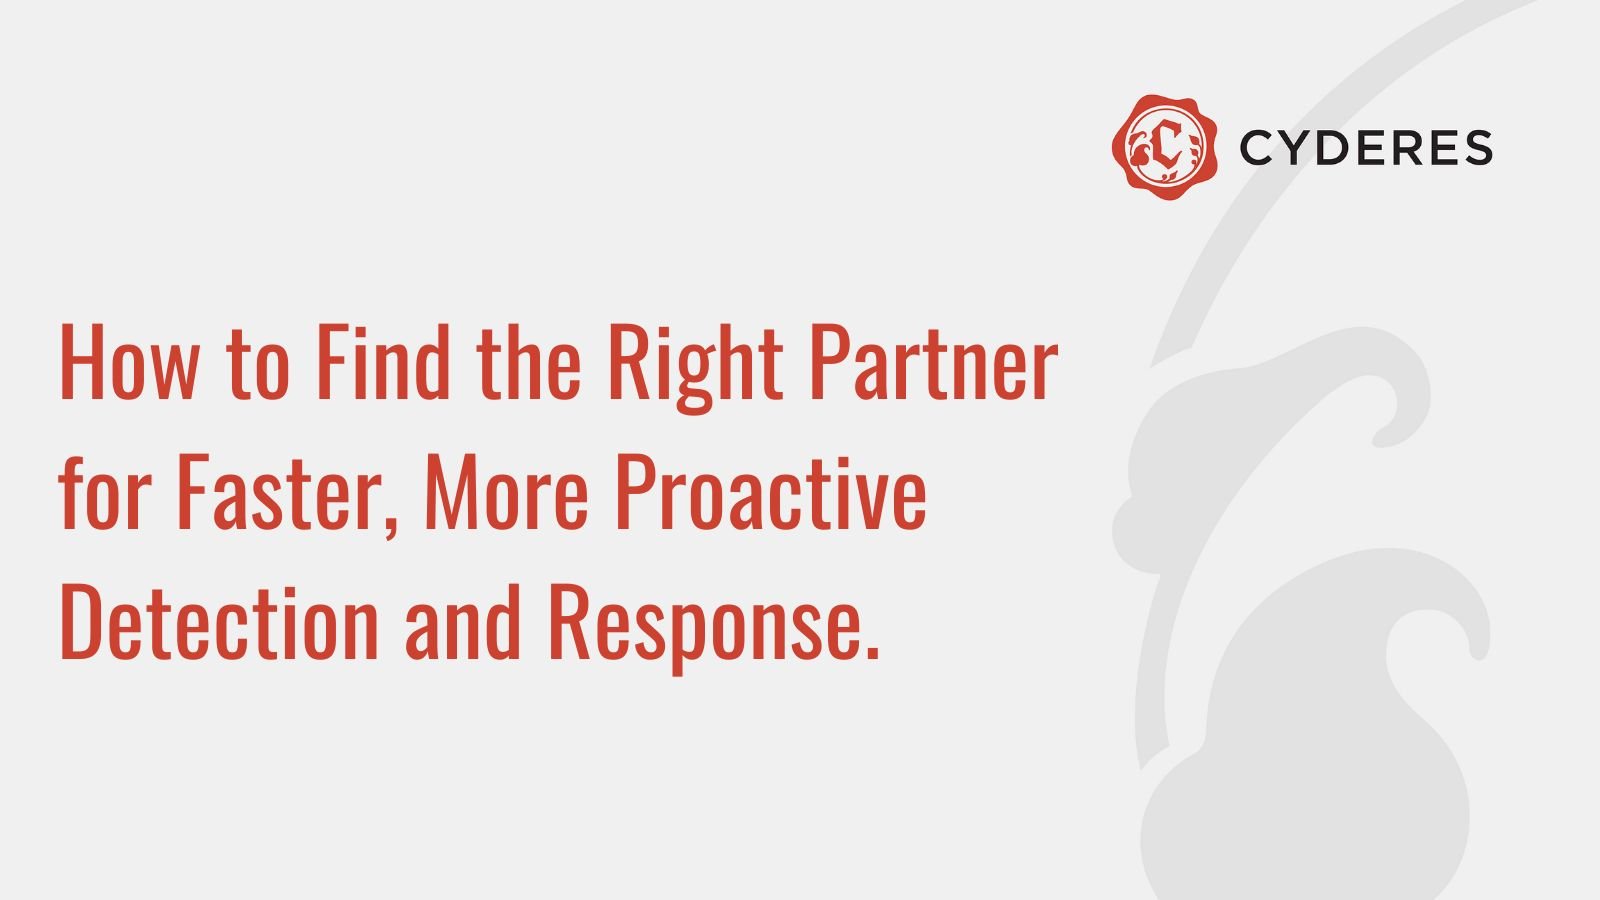 How to Find the Right Partner for Faster, More Proactive Detection and Response